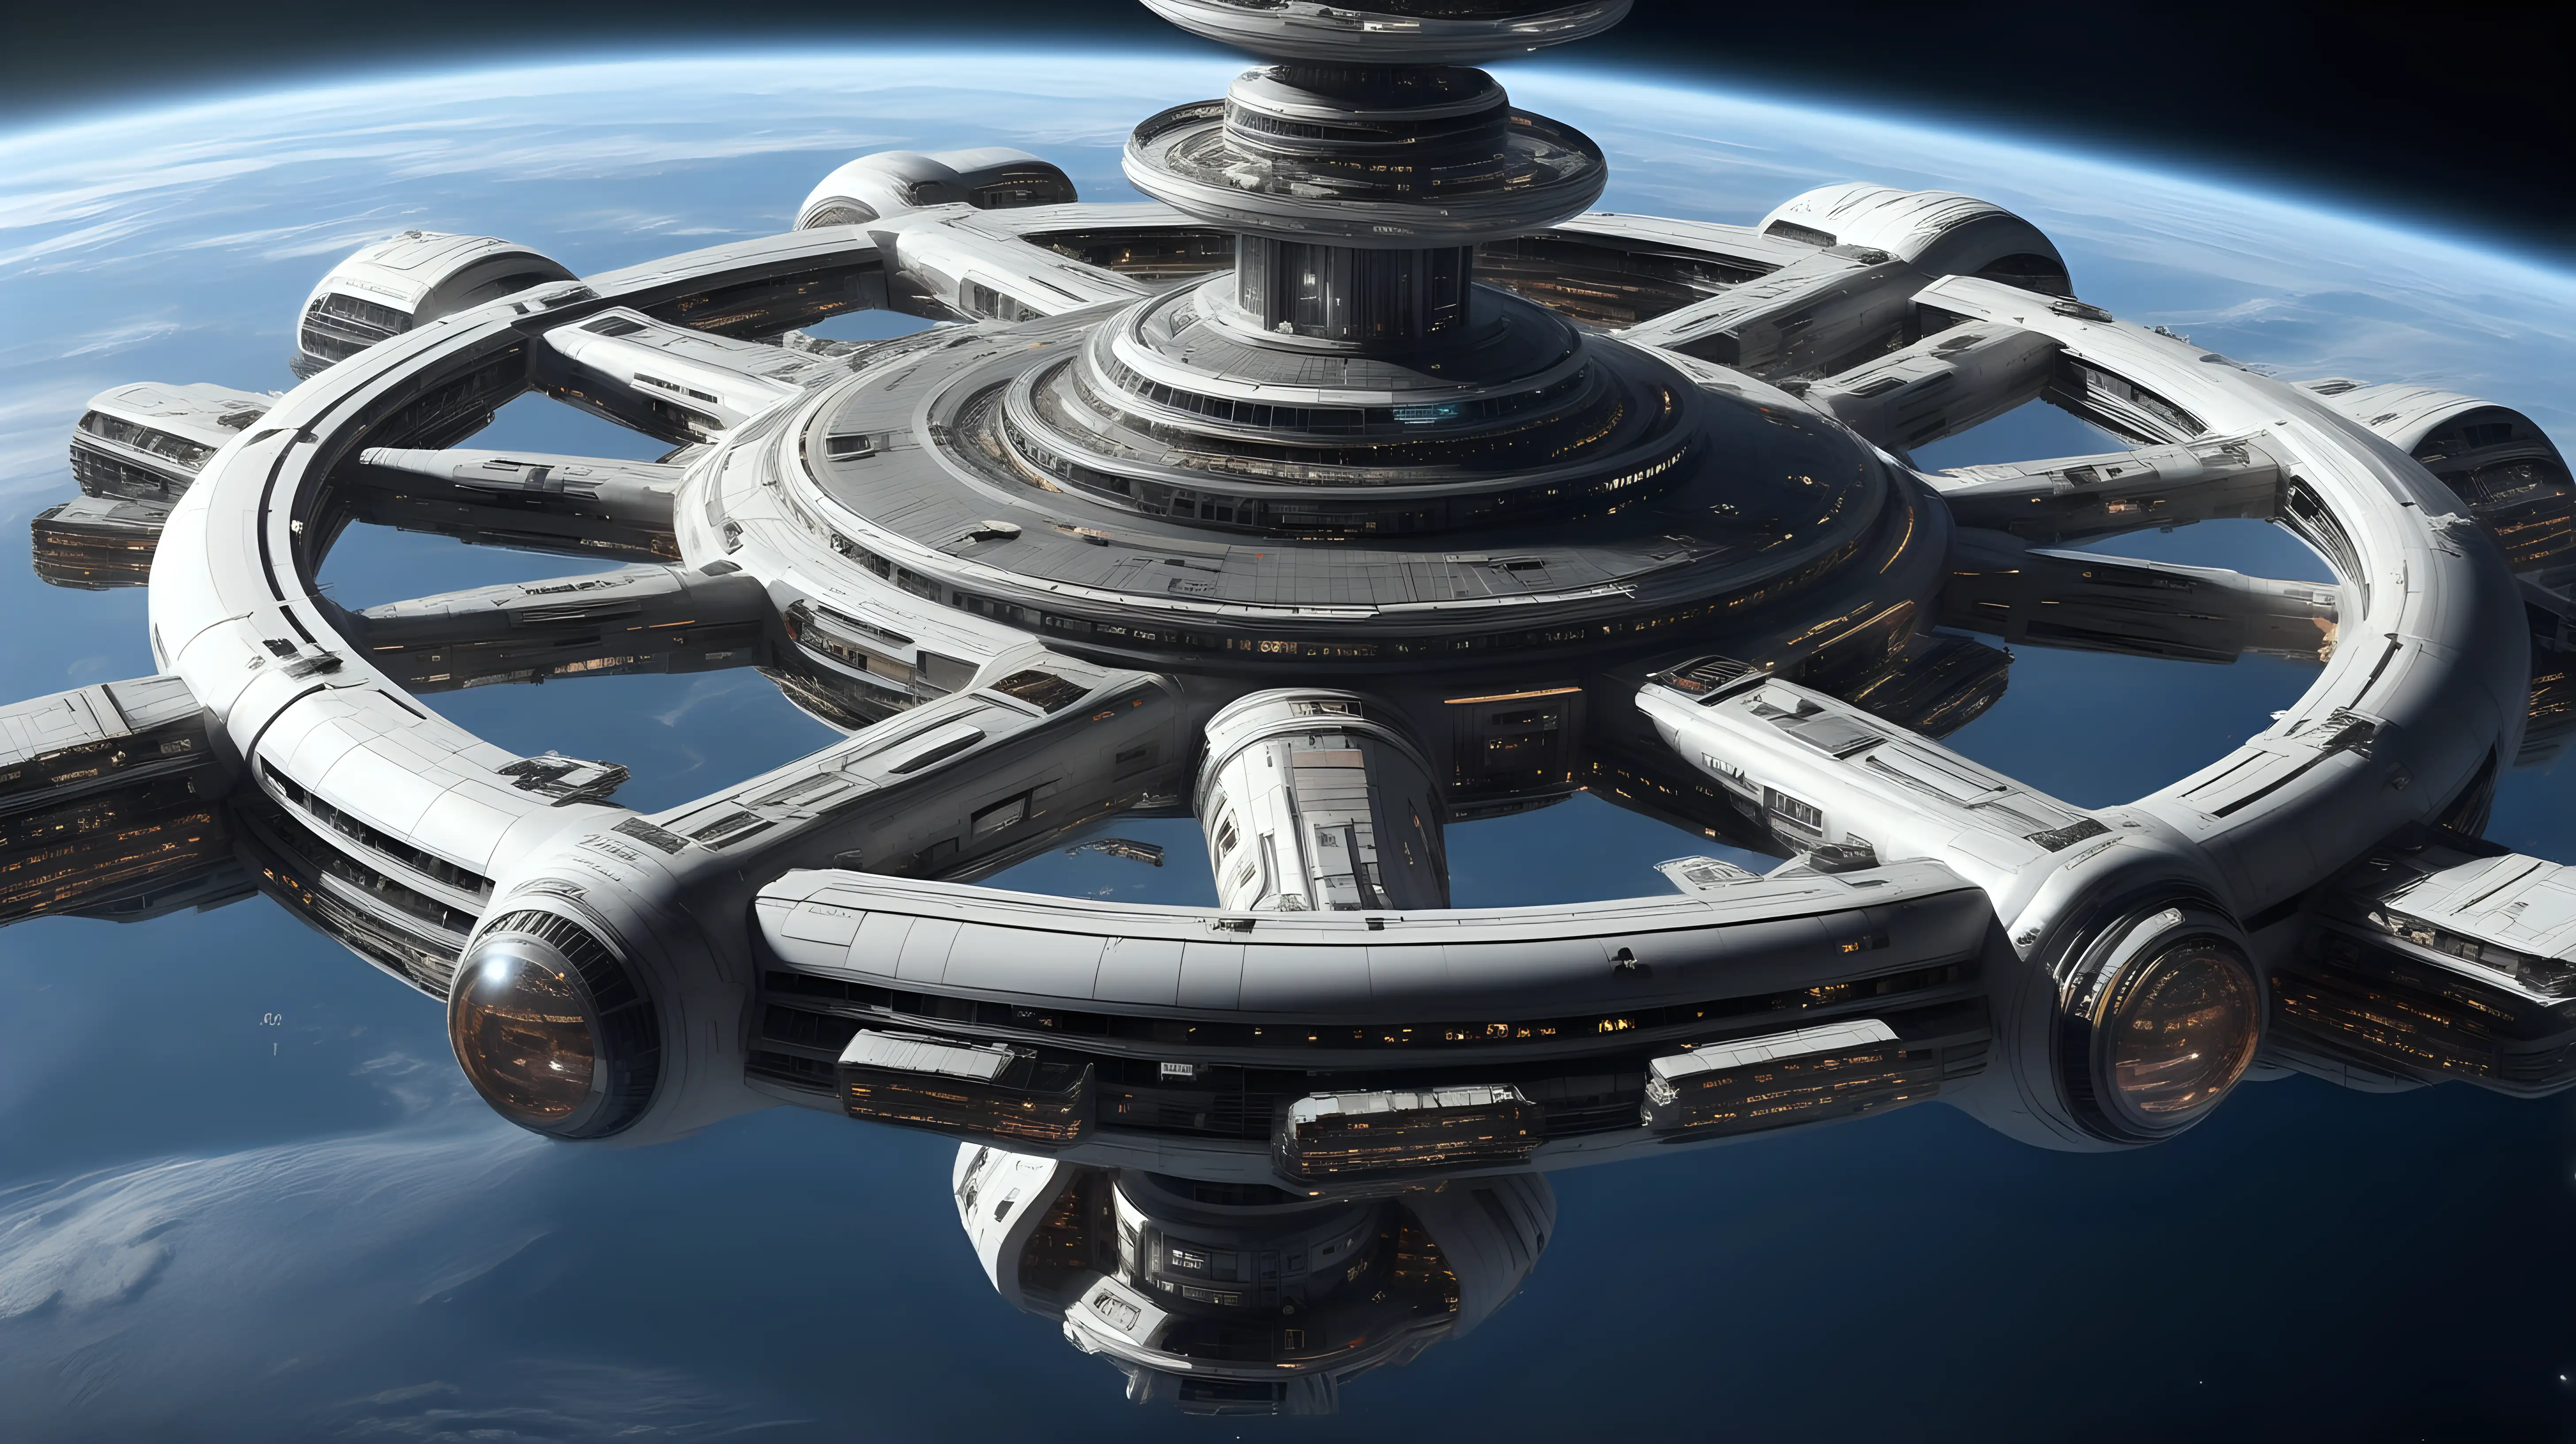 ultra-realistic high resolution and highly detailed photo with depth-perception of a futuristic extremely large rotating space station big enough for a population of 5000, there are space ships docked at the station